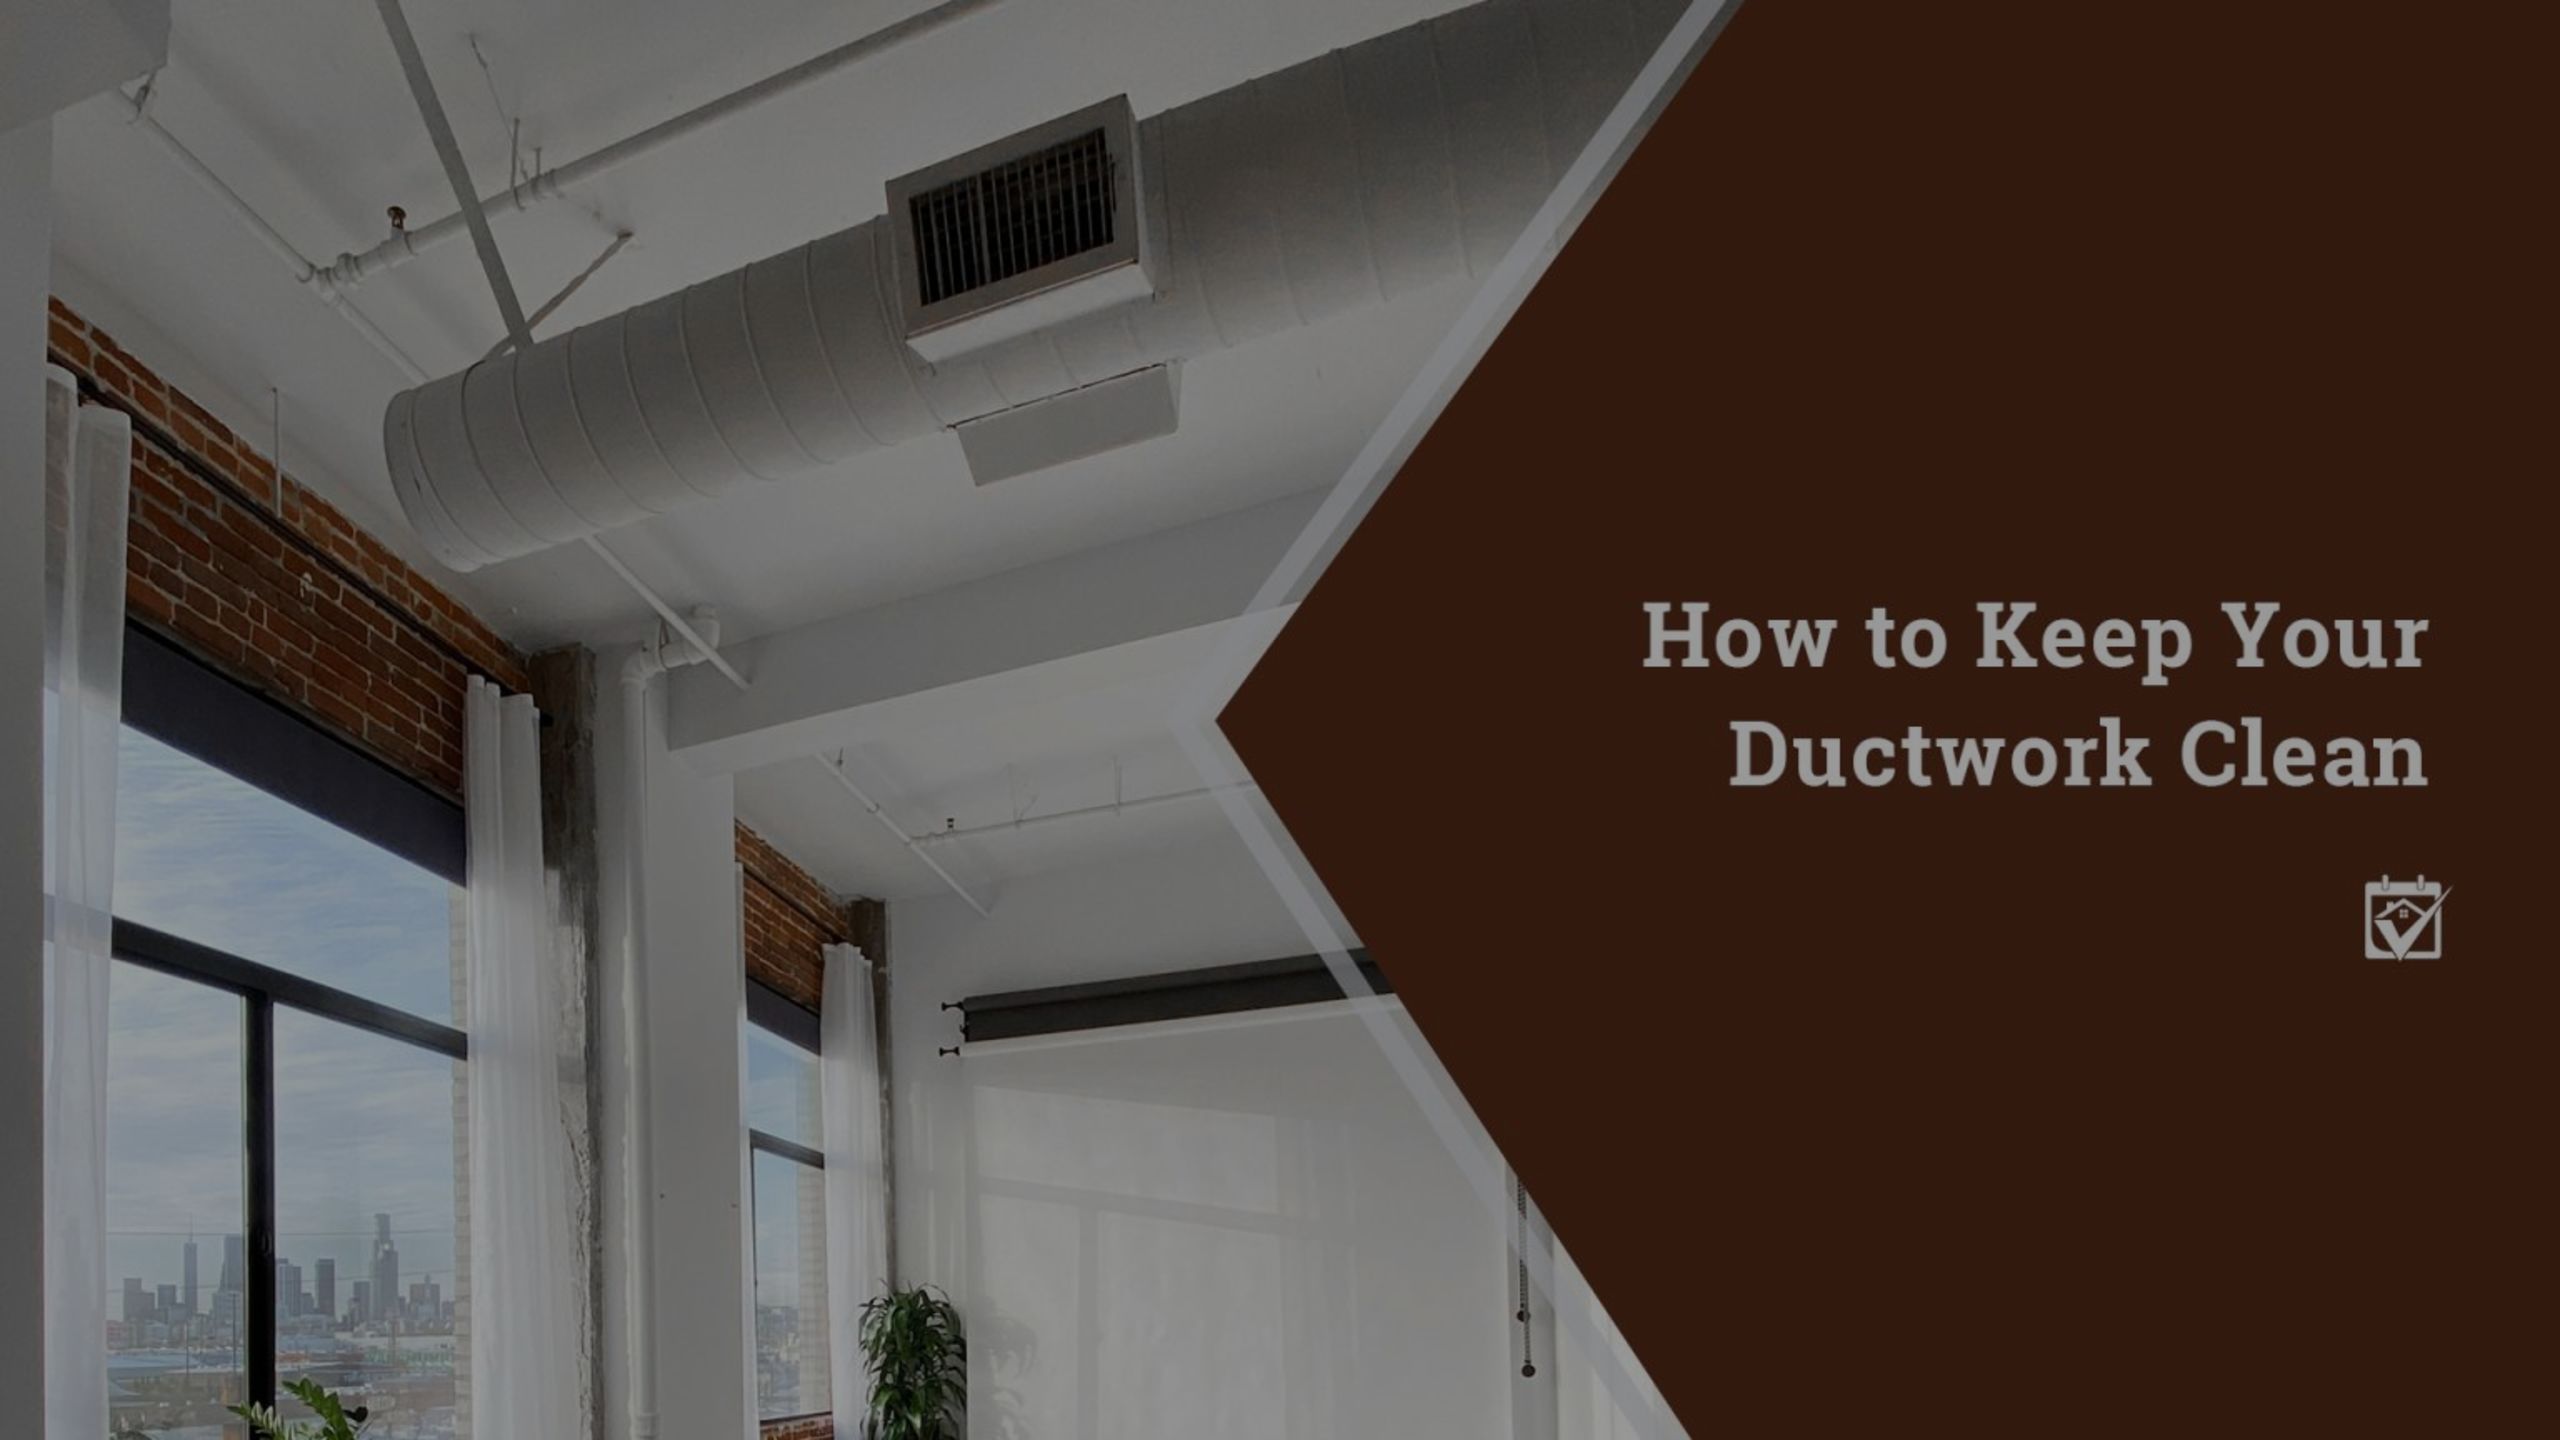 How to Keep Your Ductwork Clean